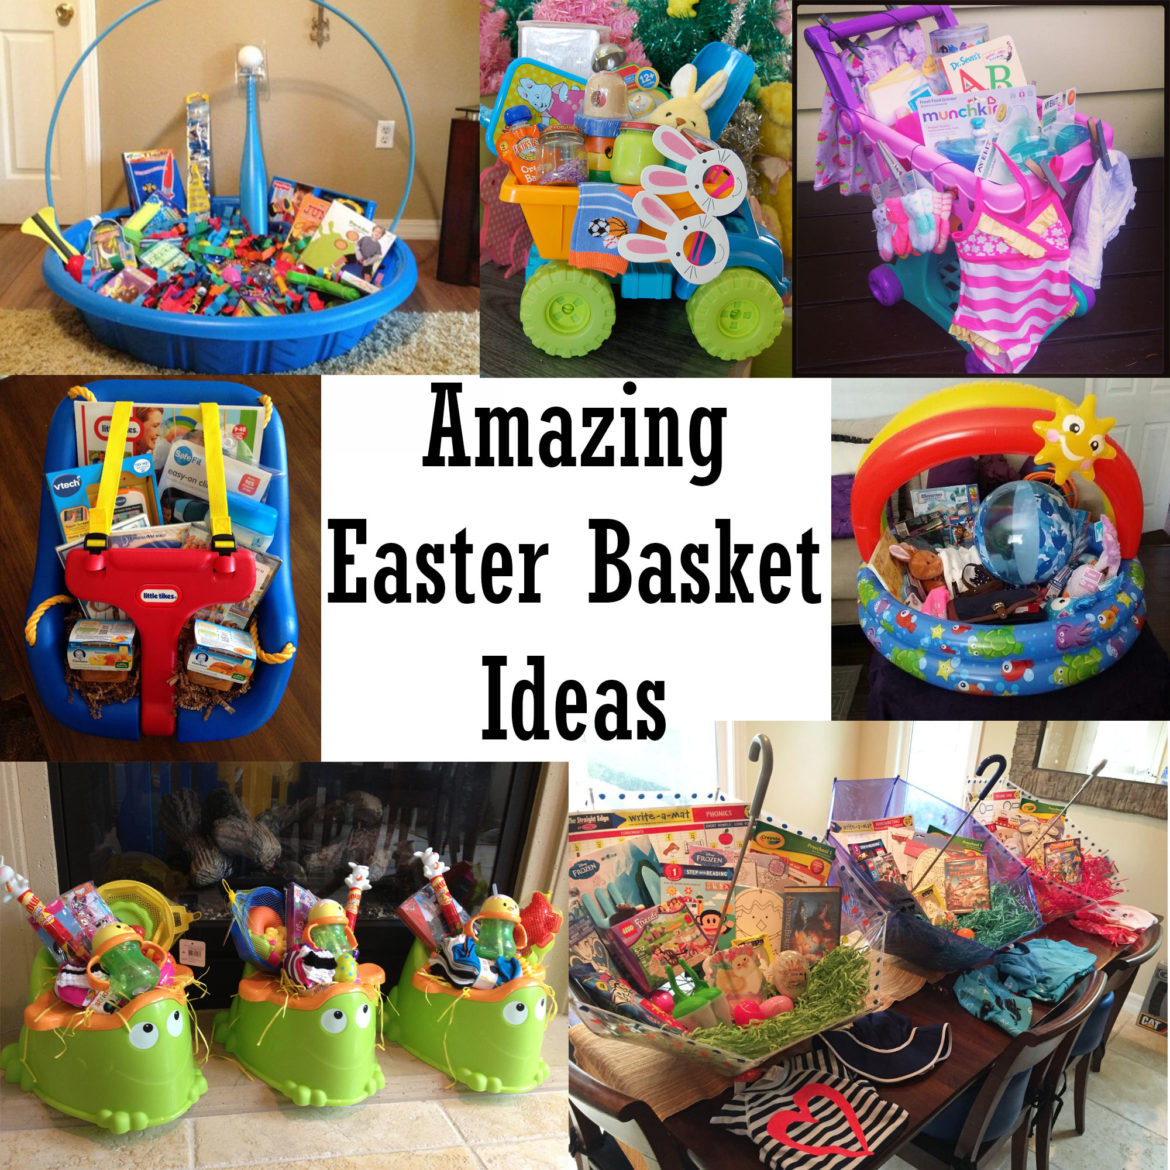 Easter Basket Gift Ideas
 Amazing Easter Basket Ideas The Keeper of the Cheerios